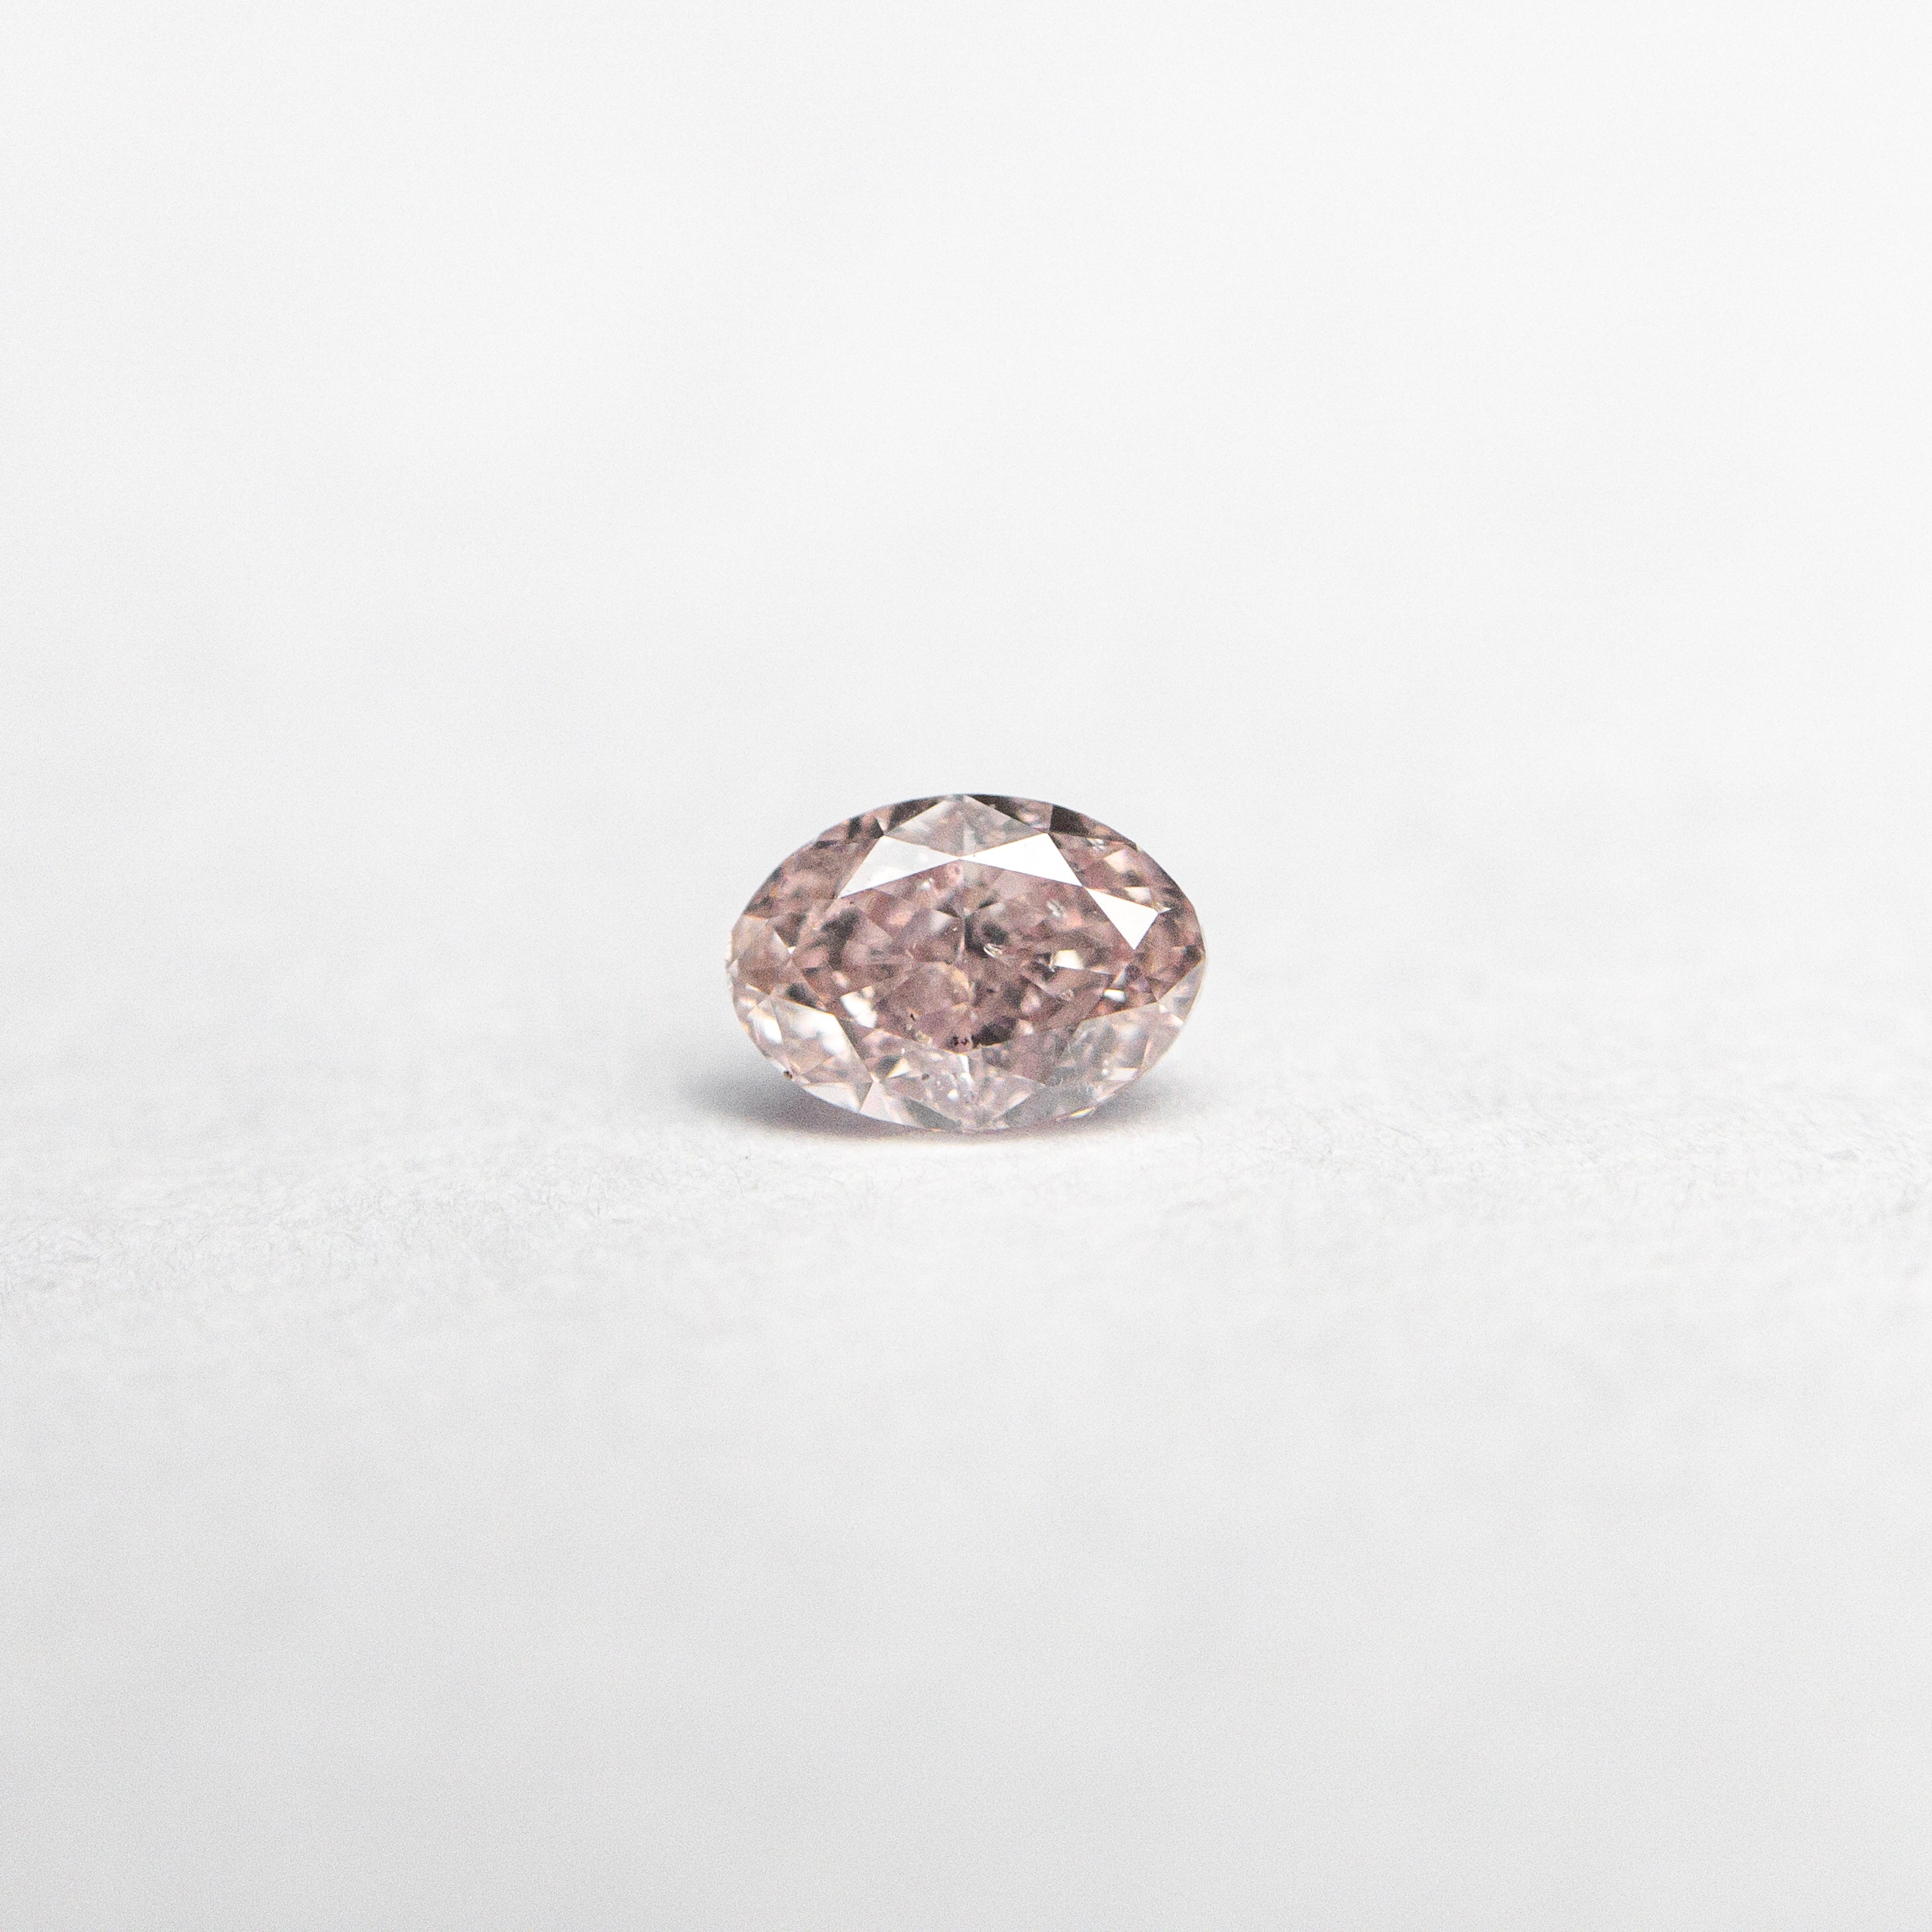 0.15ct 3.96x2.77x1.80mm GIA SI2 Fancy Pink Oval Brilliant 🇦🇺 24089-01